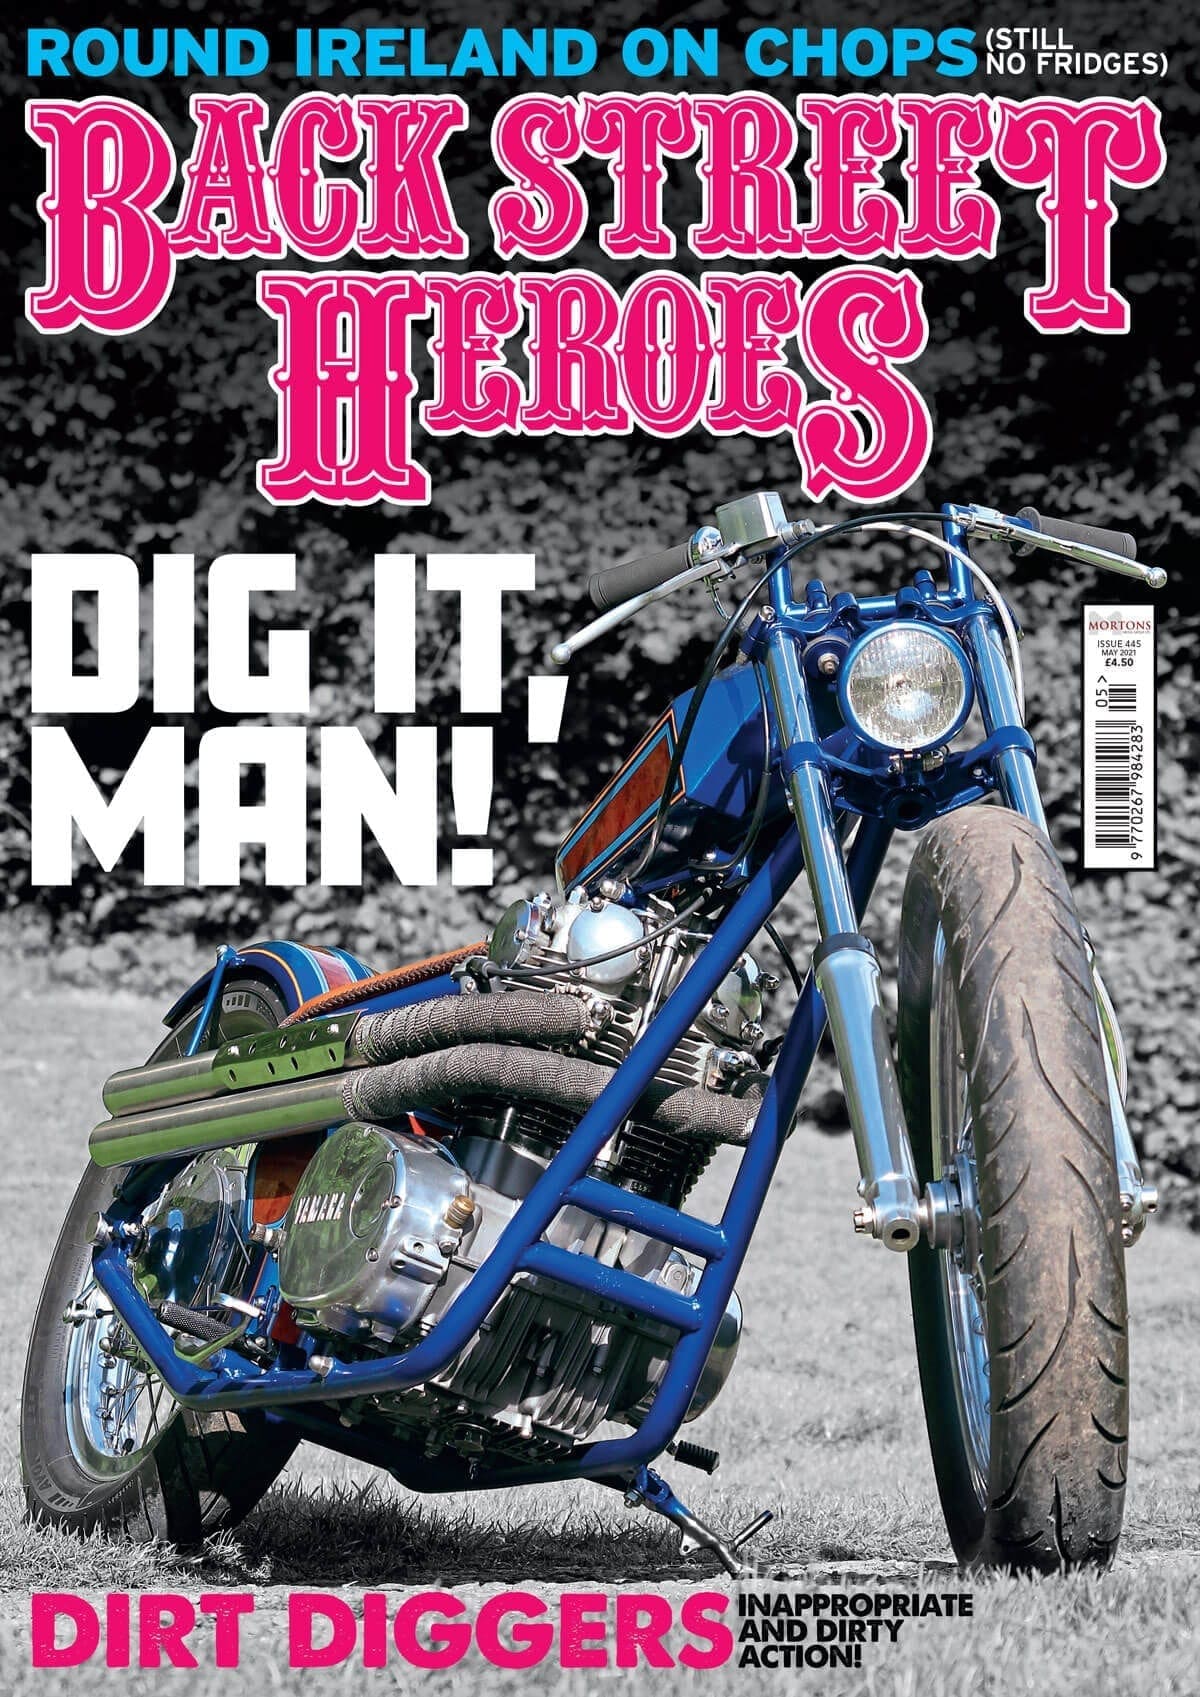 PREVIEW: May issue of Back Street Heroes magazine